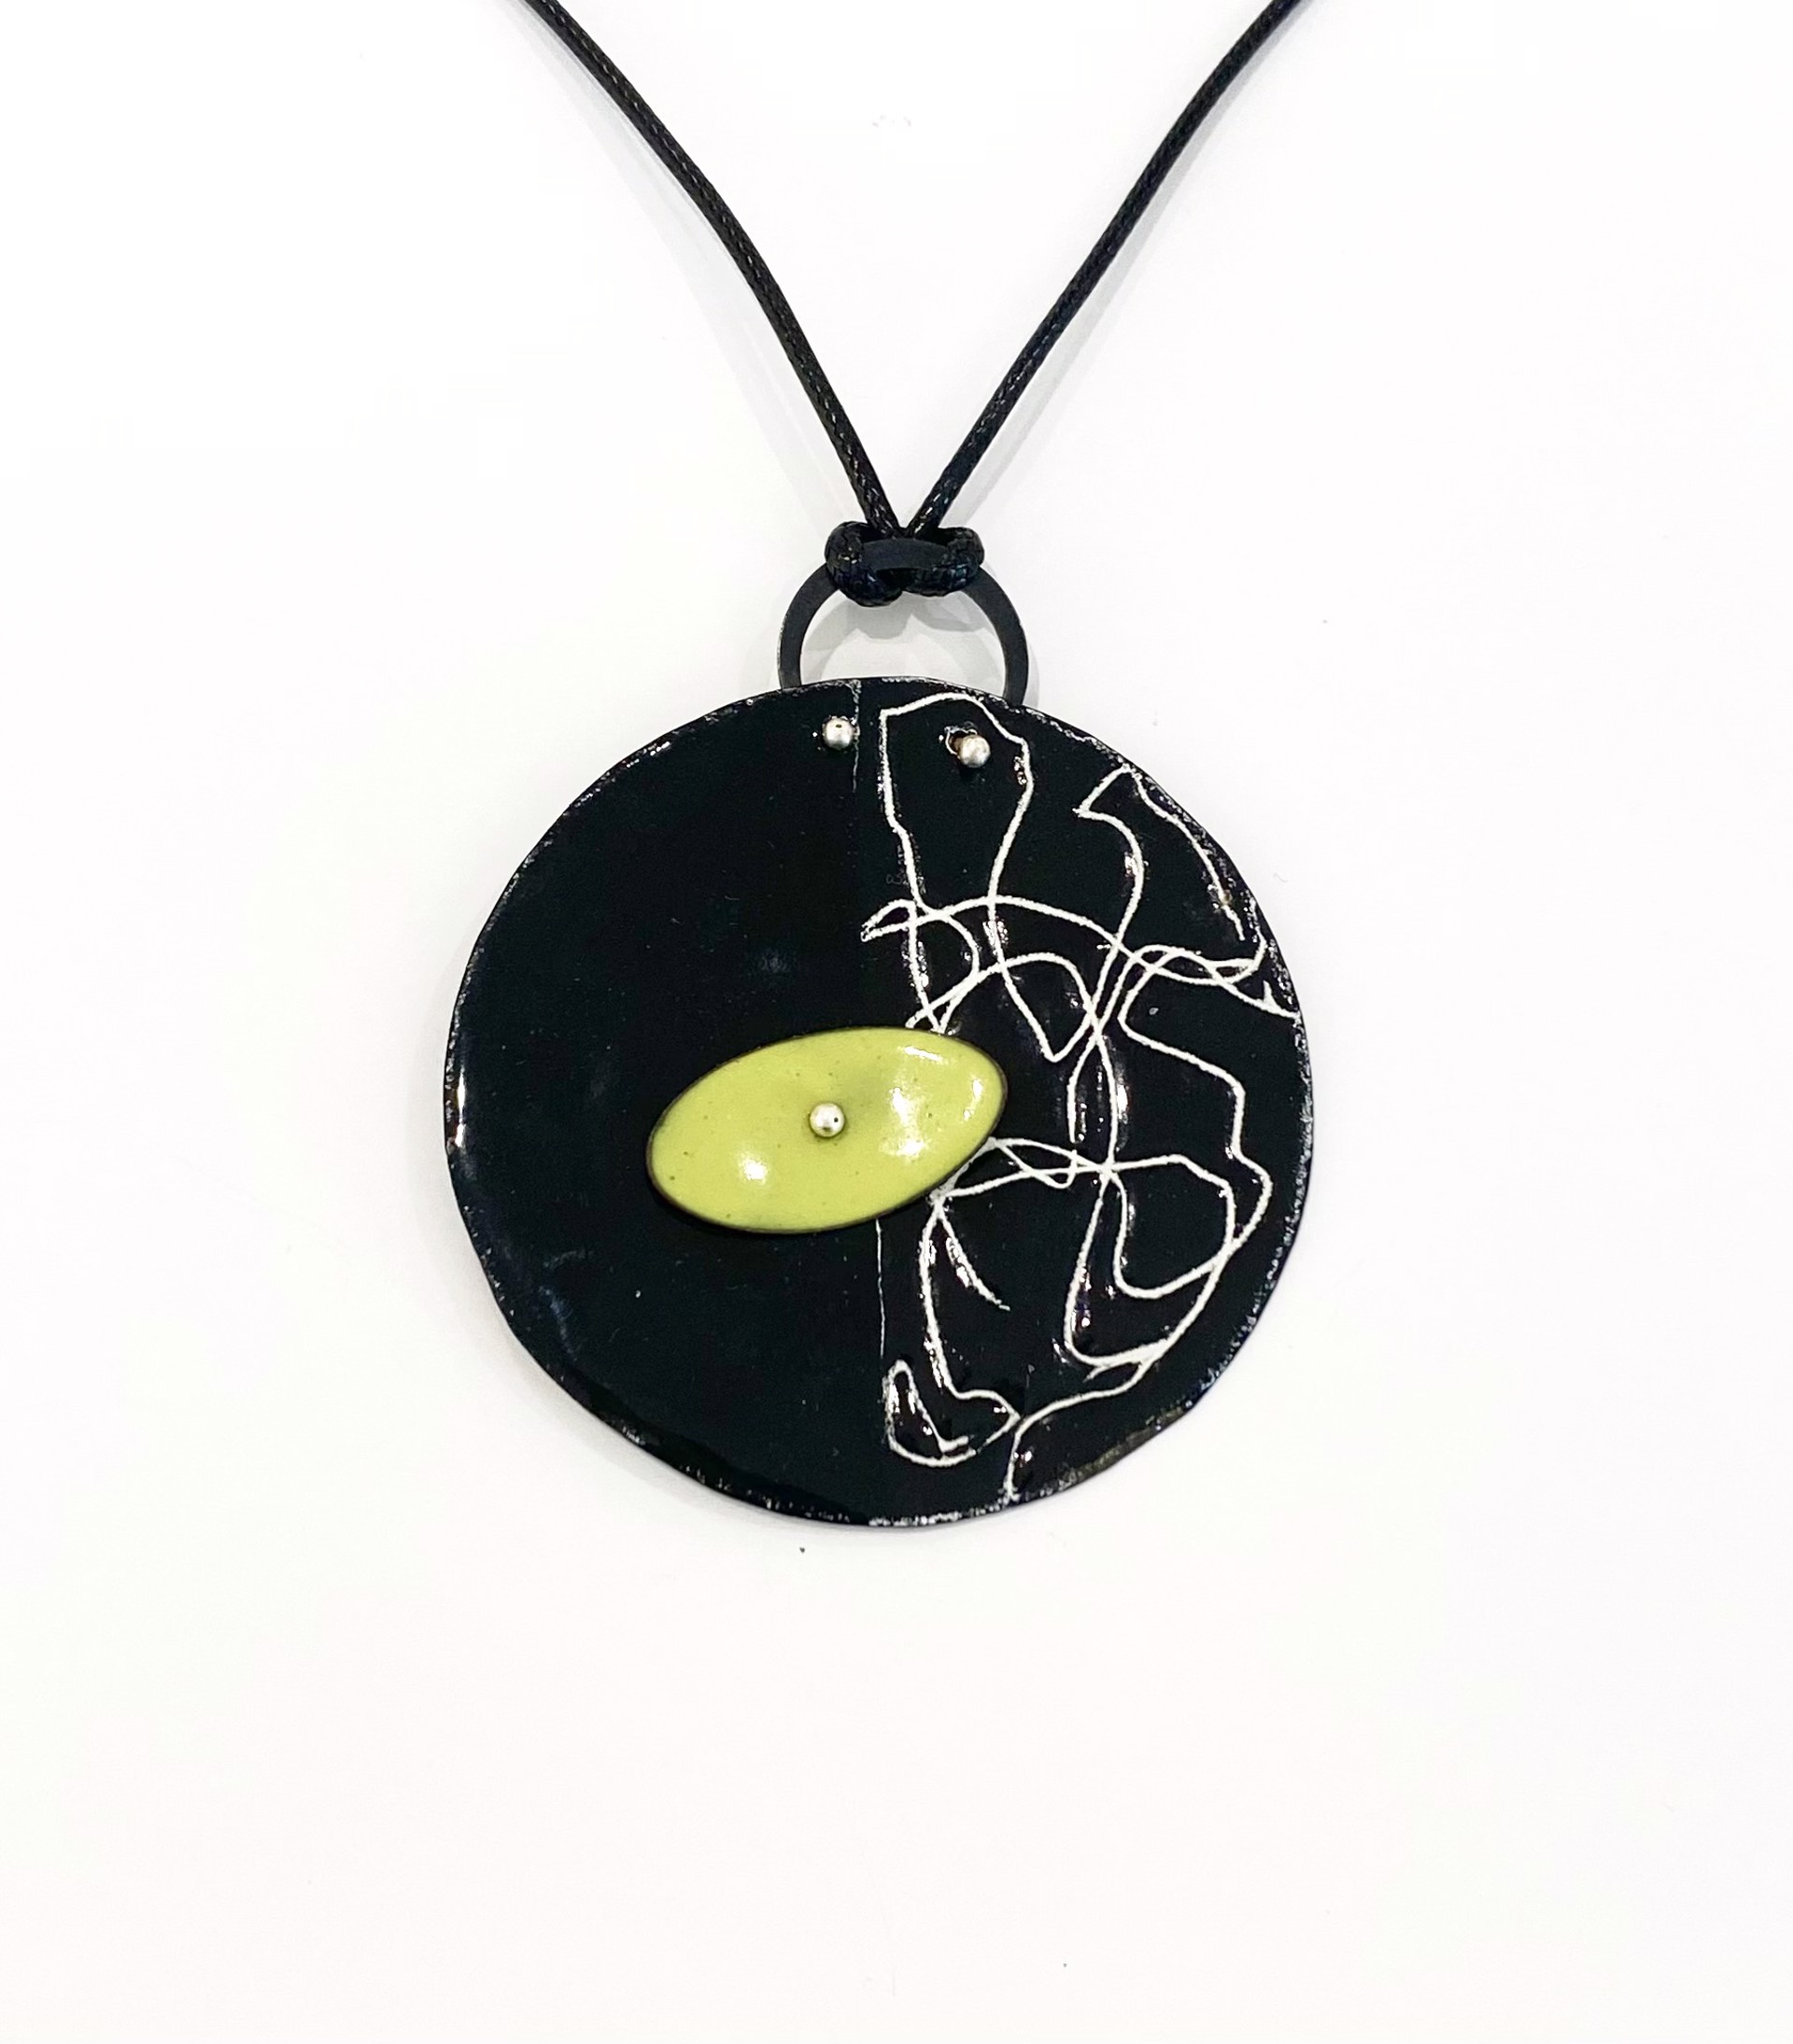 12.6 Enamel Copper Necklace by Cathy Talbot